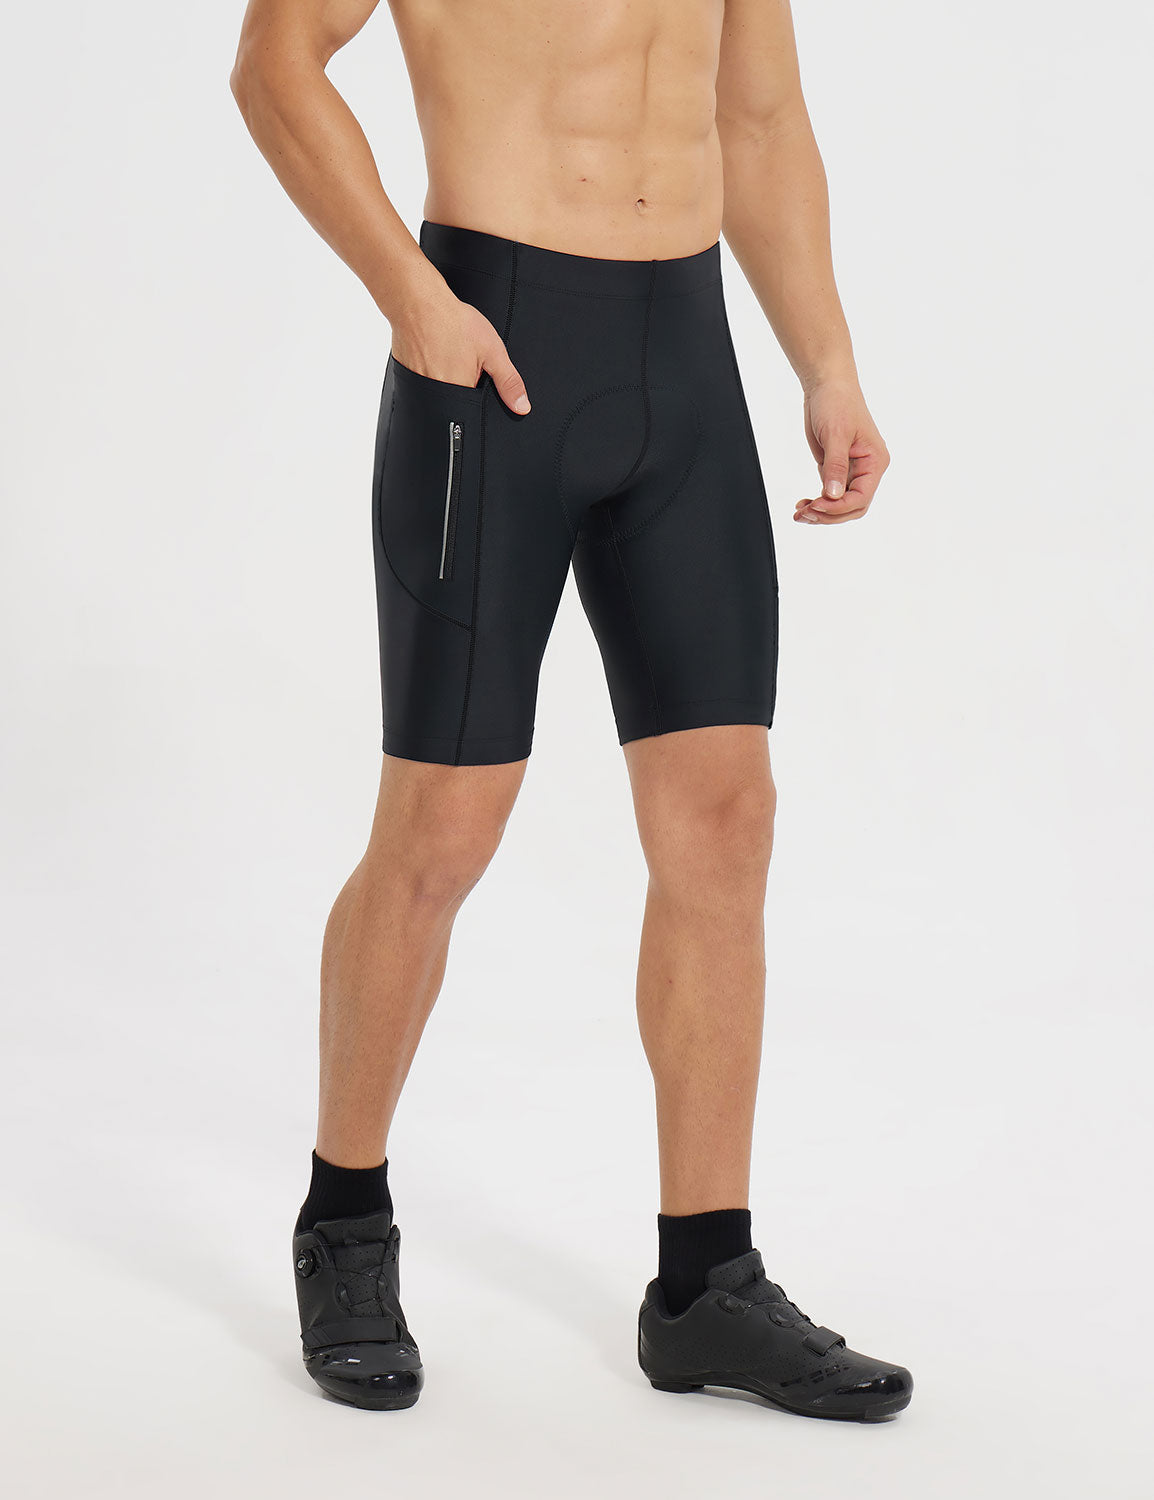 Baleaf Men's Lycra Cushioned Tight Cycling Shorts Anthracite Side